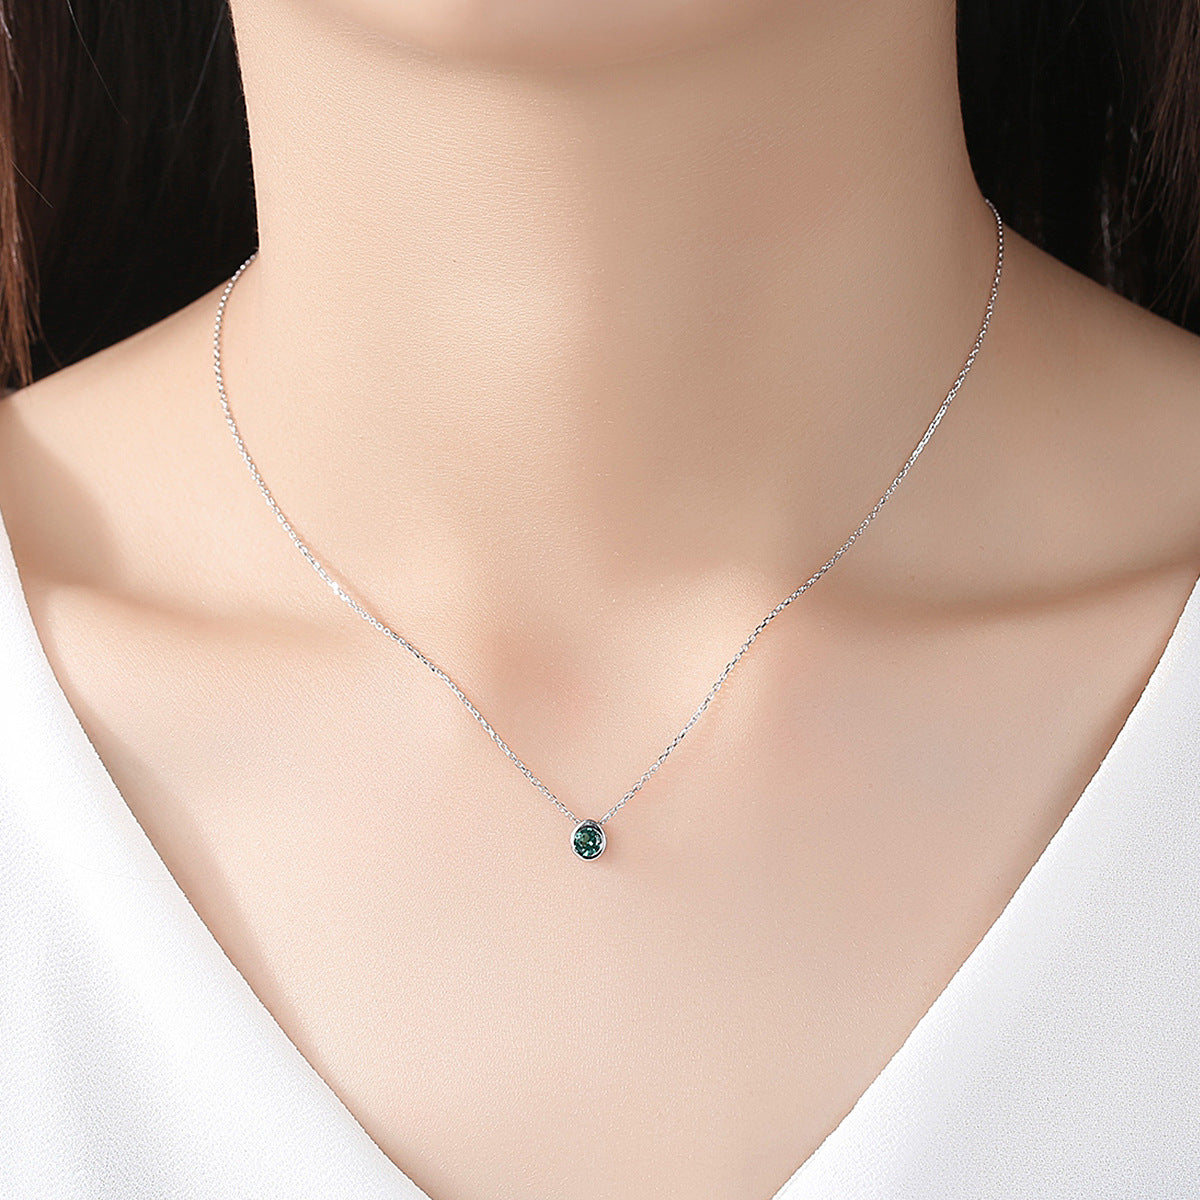 Gemstonely-Elegant S925 Sterling Silver Simulate Emerald/Ruby/Cubic Zirconia Pendant Necklace -  Simple and Stylish Jewelry